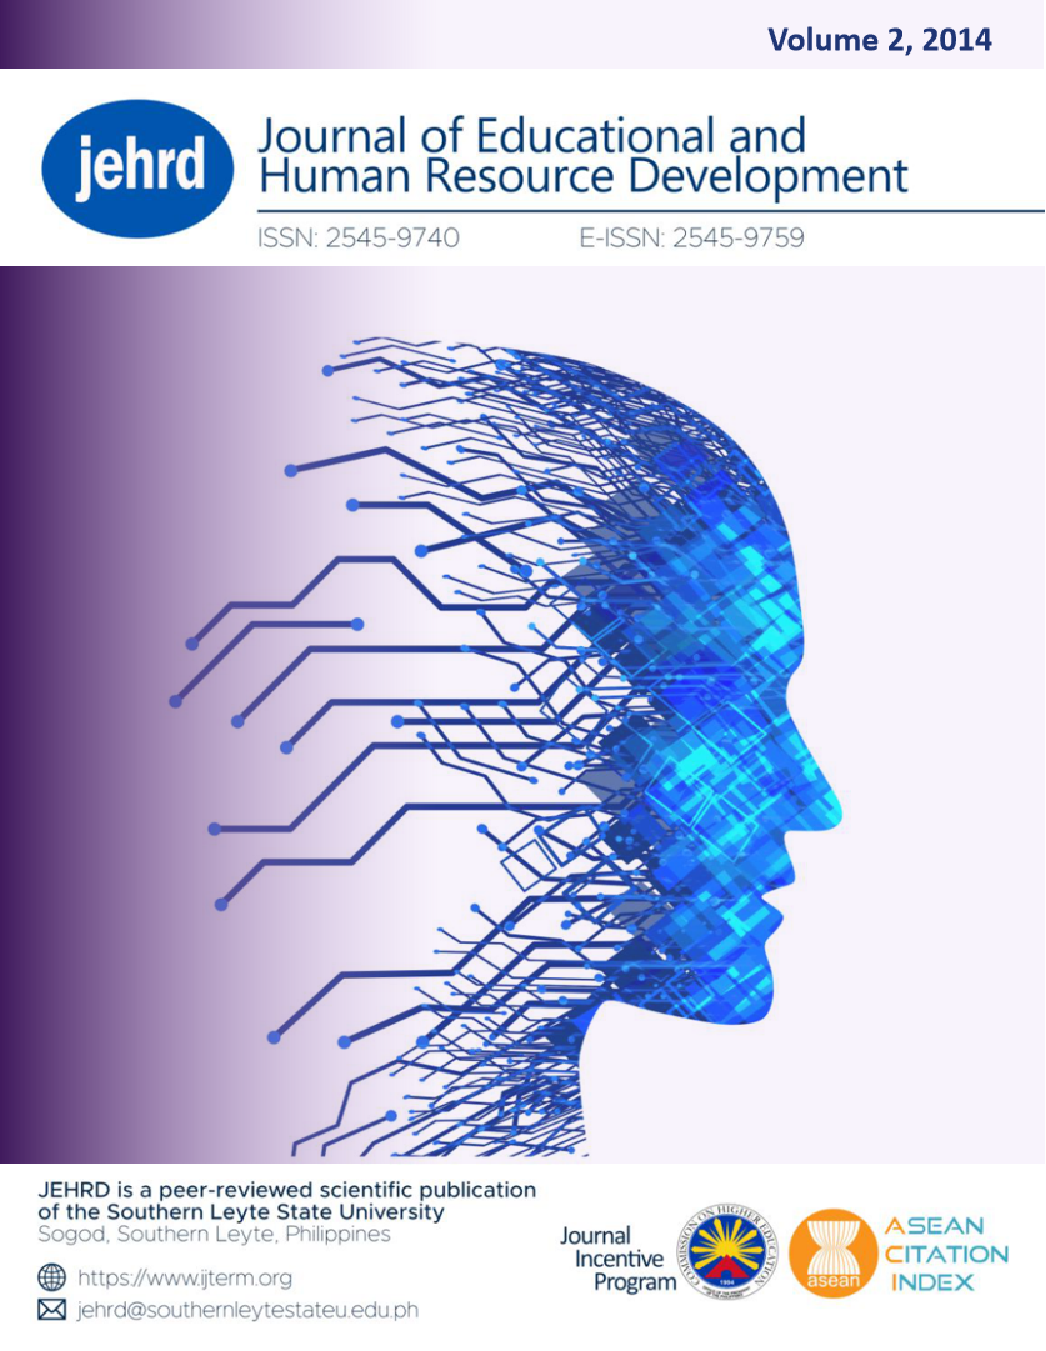 					View Vol. 2 (2014):  Journal of Educational and Human Resource Development
				